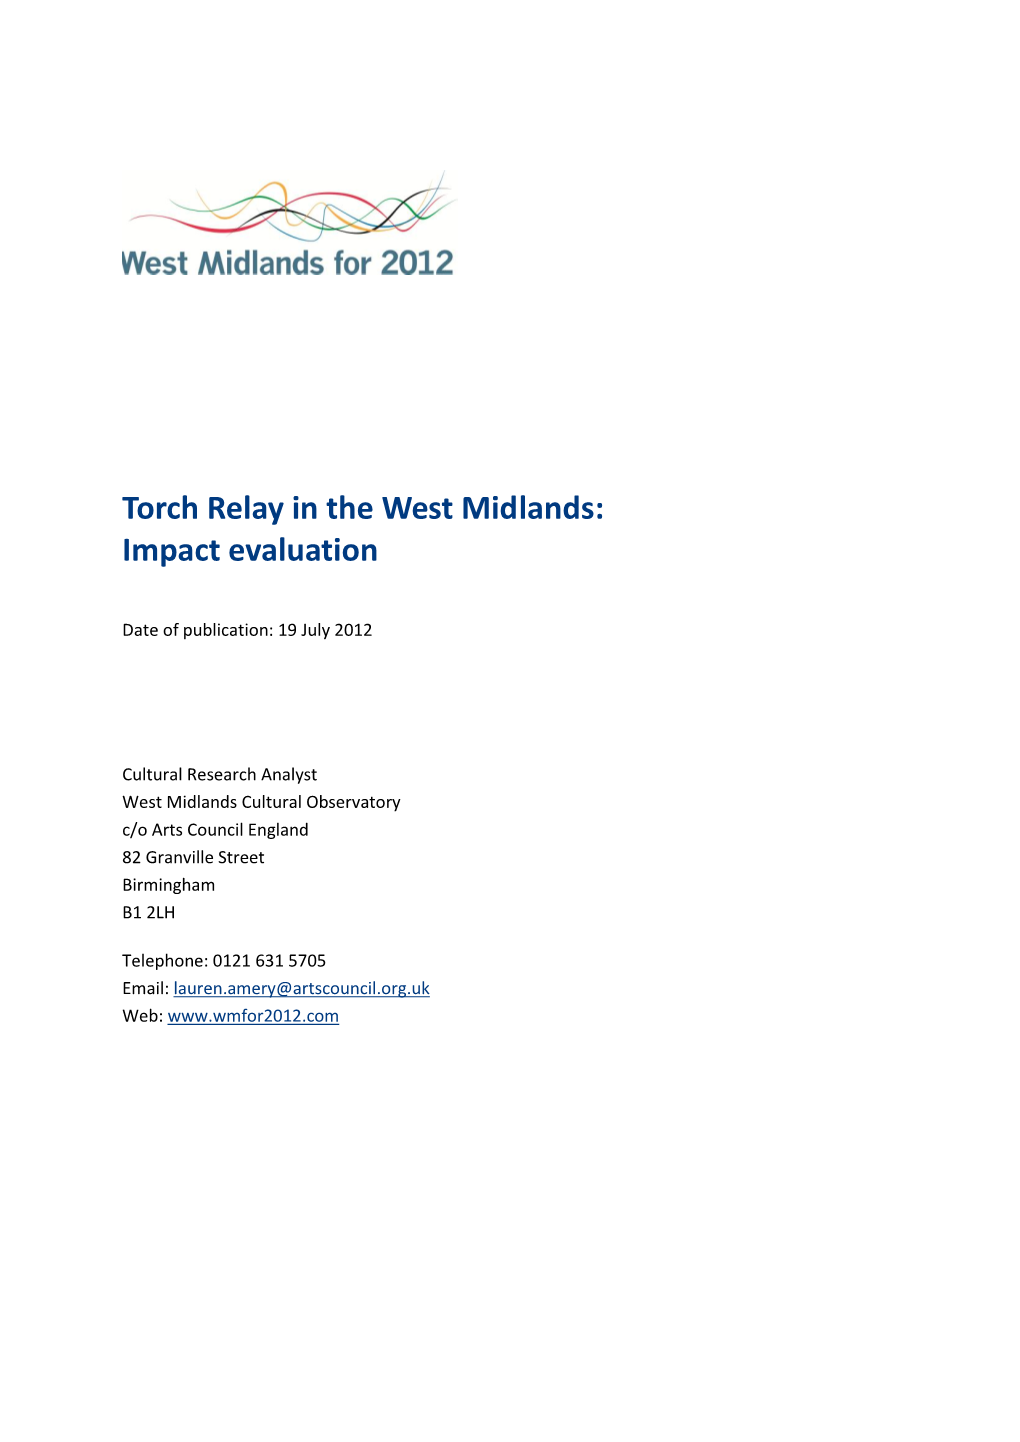 Cultural Olympiad in the West Midlands: an Evaluation of Impact